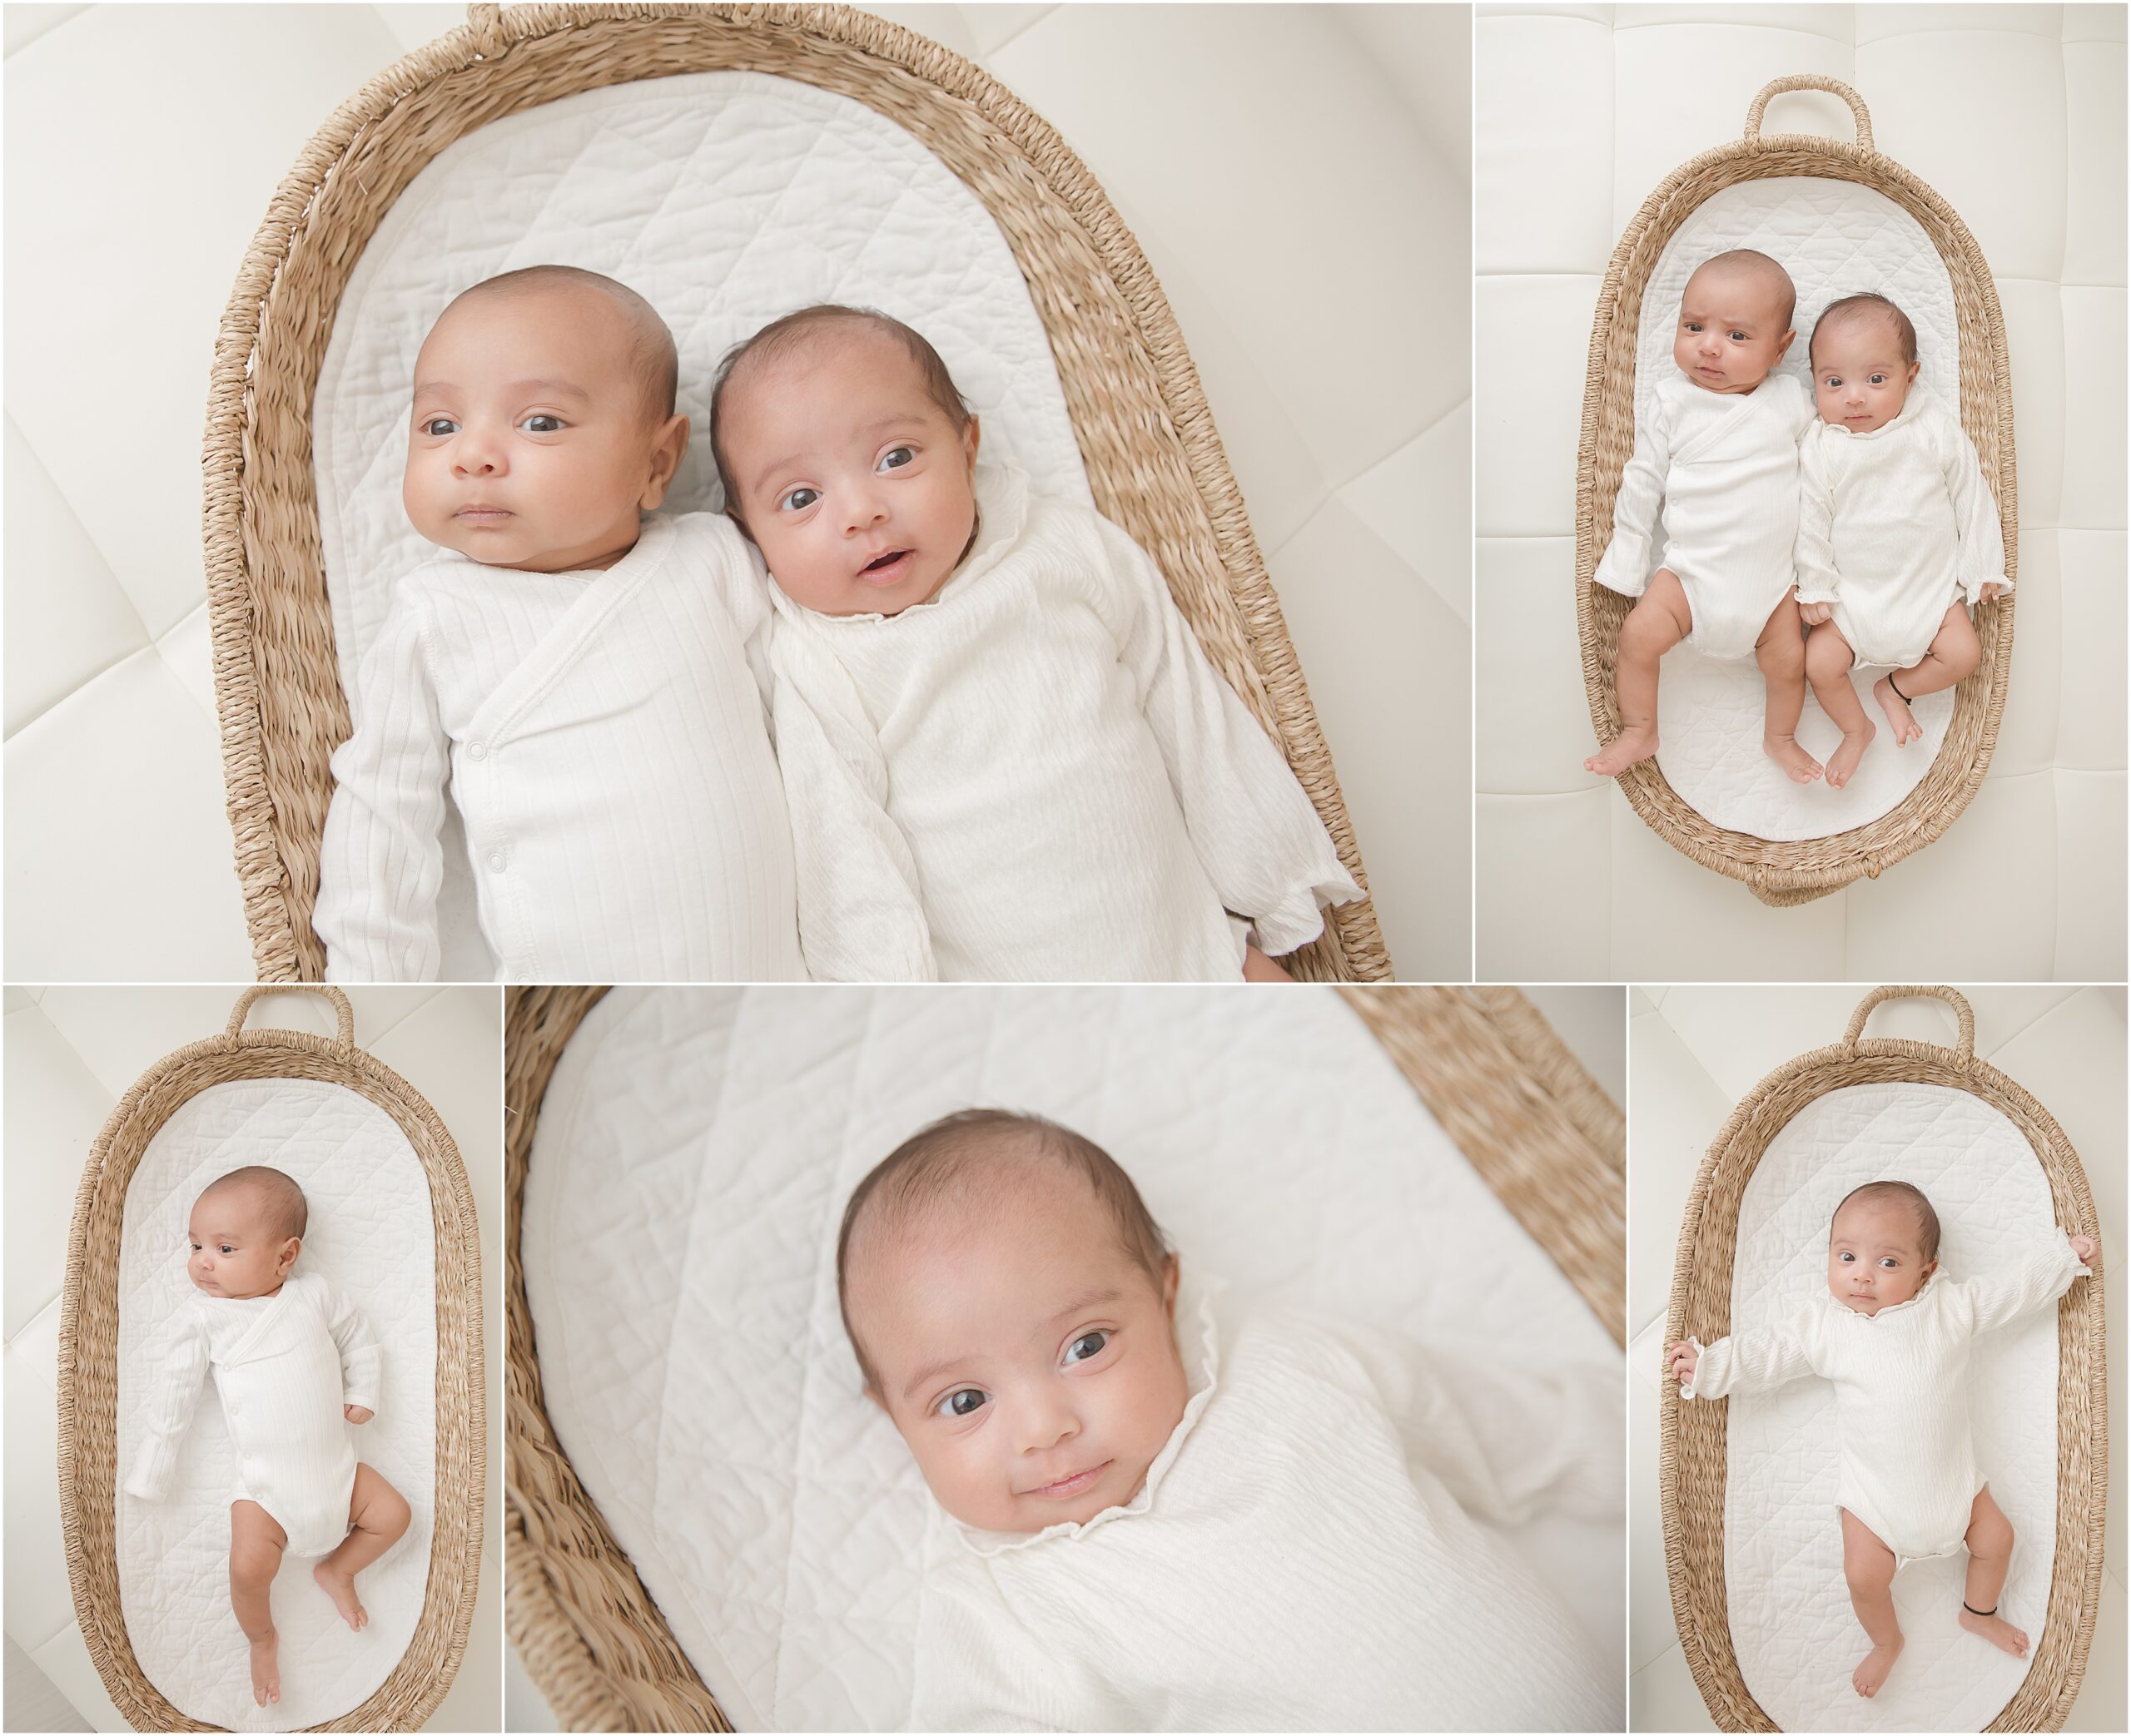 Newborn boy and girl twins wearing white pose in a woven basket for professional photos at Christy Johnson Photography studio